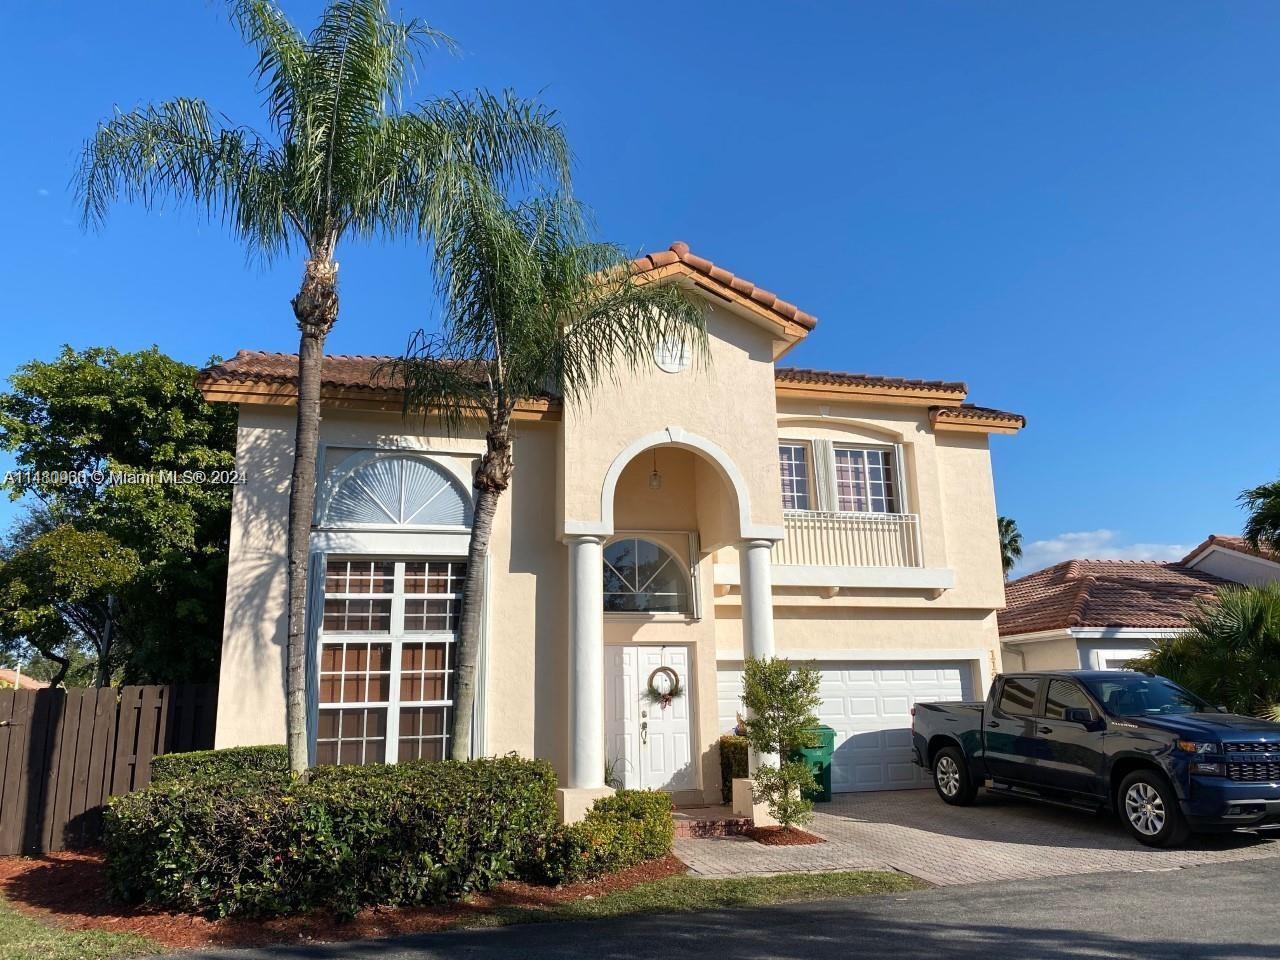 Photo of 11300 NW 58th Ter in Doral, FL